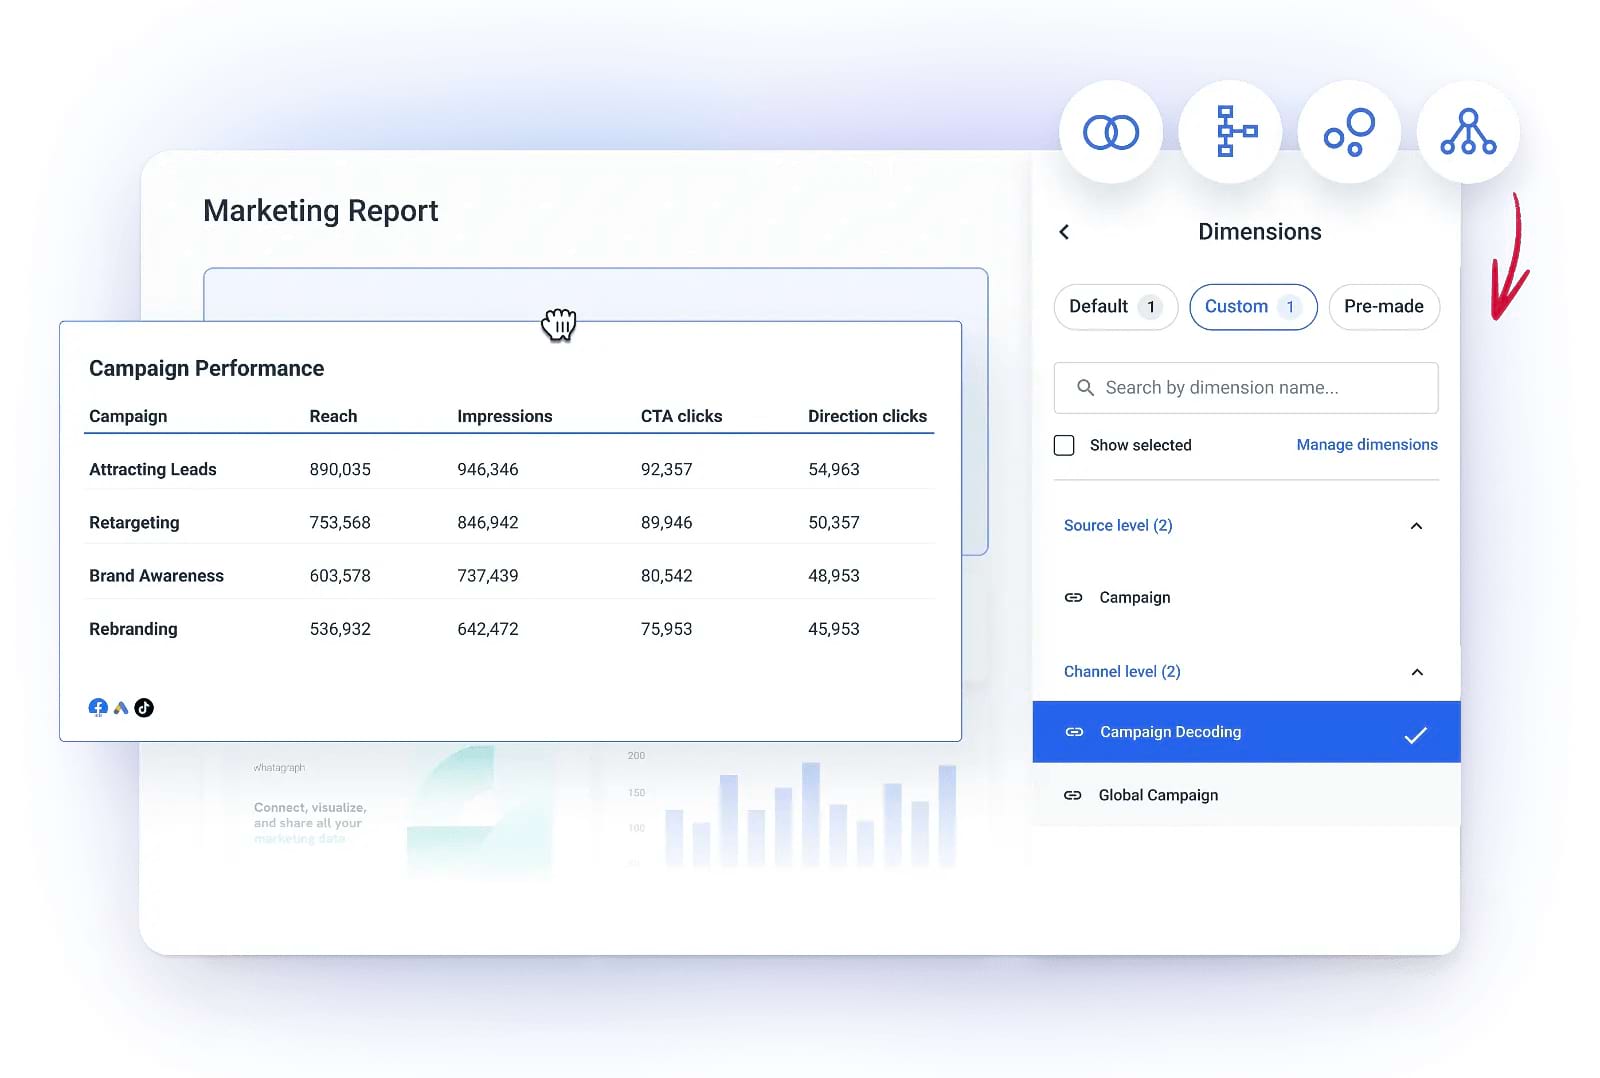 "Marketing Report" dashboard from Whatagraph